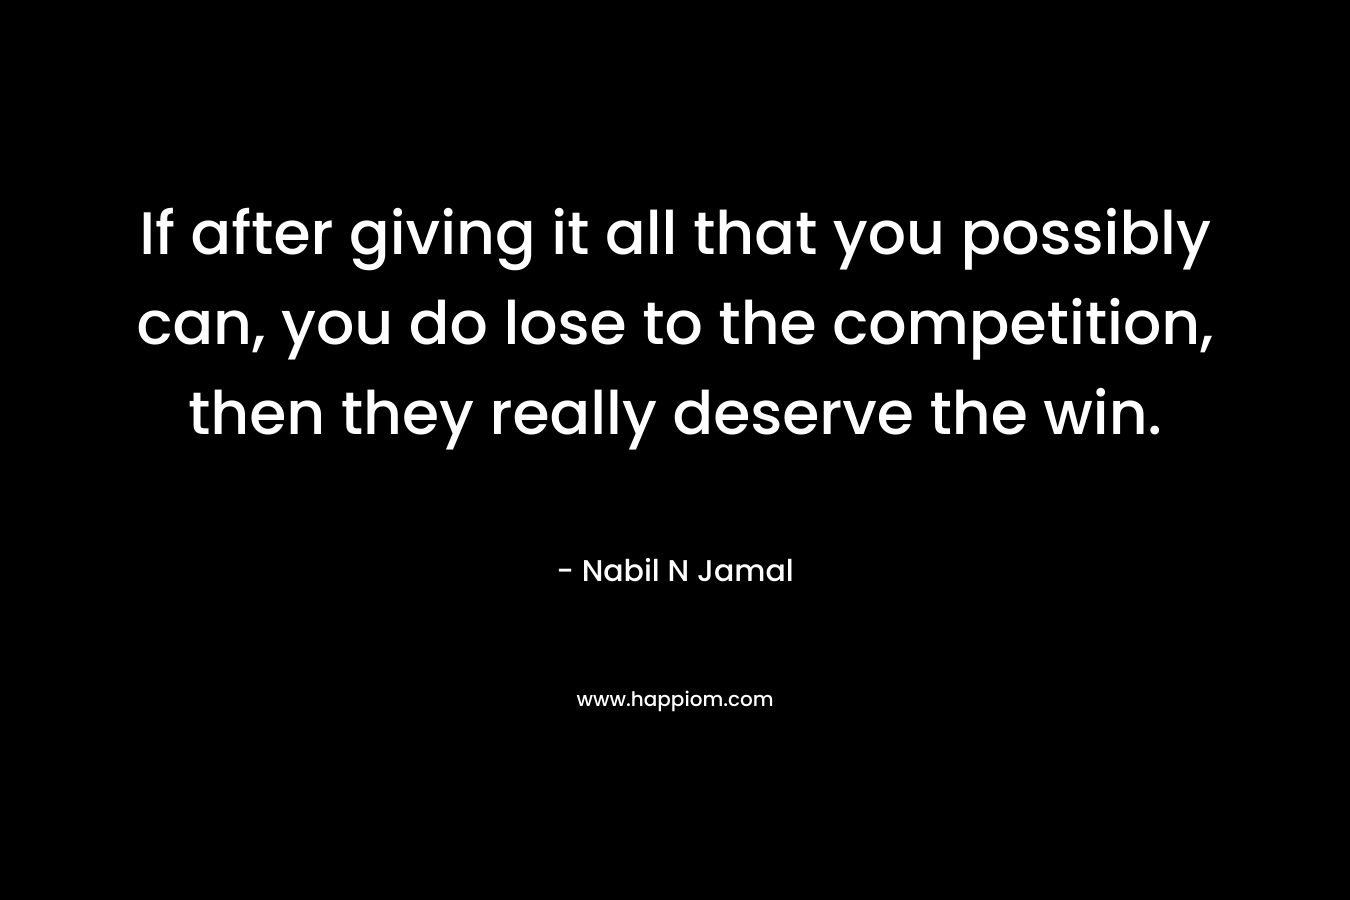 If after giving it all that you possibly can, you do lose to the competition, then they really deserve the win. – Nabil N Jamal